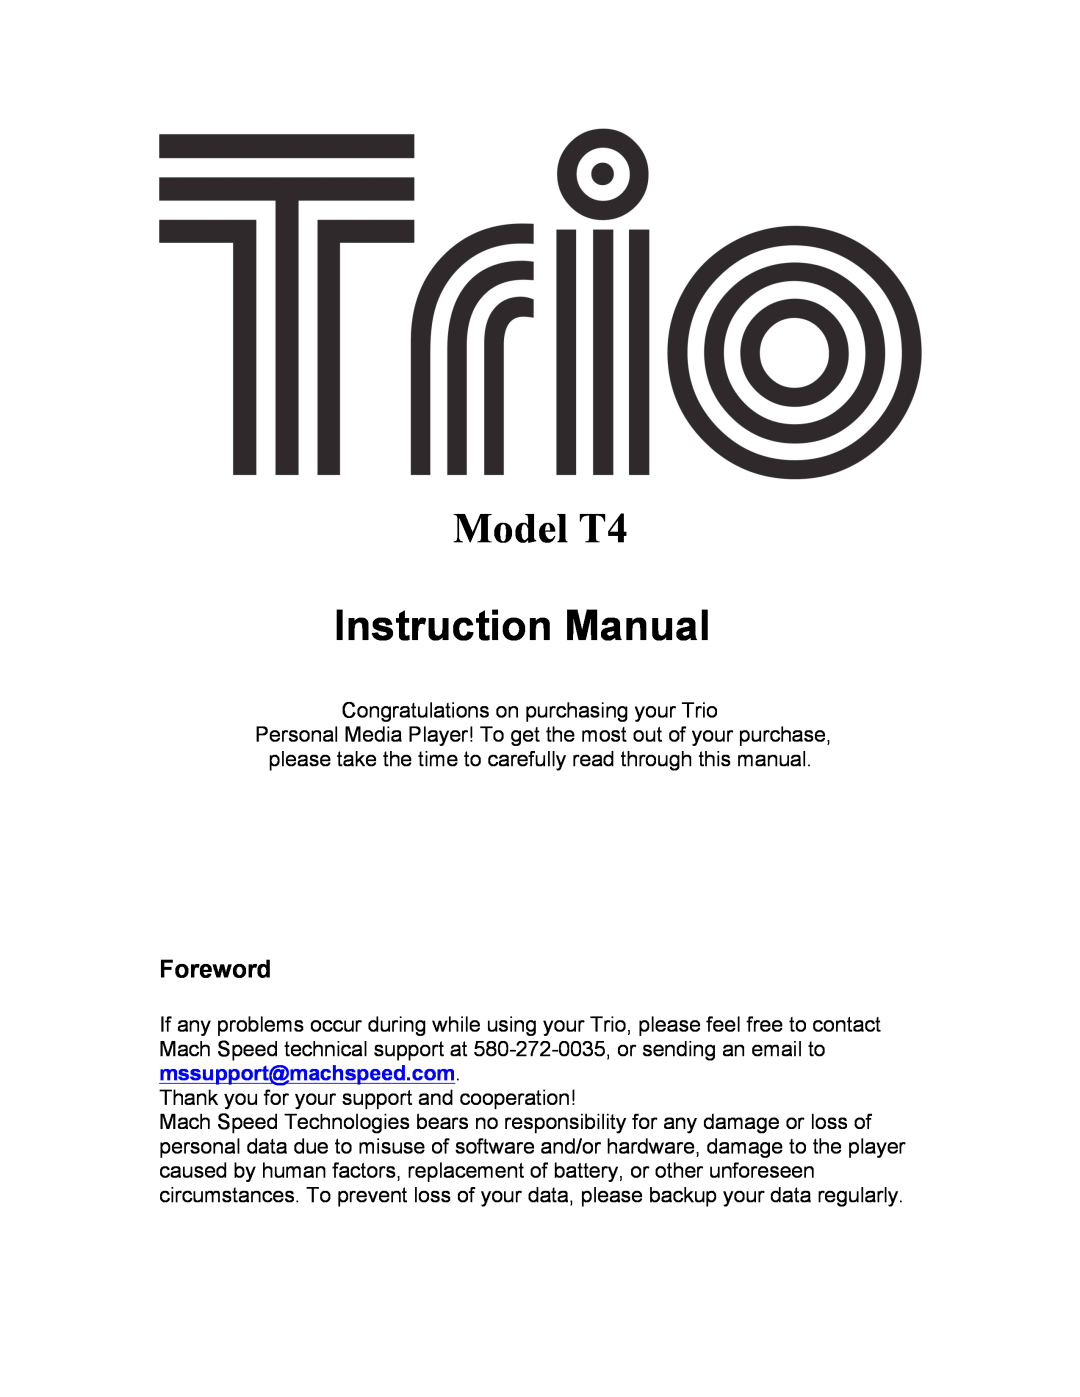 Mach Speed Technologies instruction manual Foreword, Model T4, Instruction Manual 